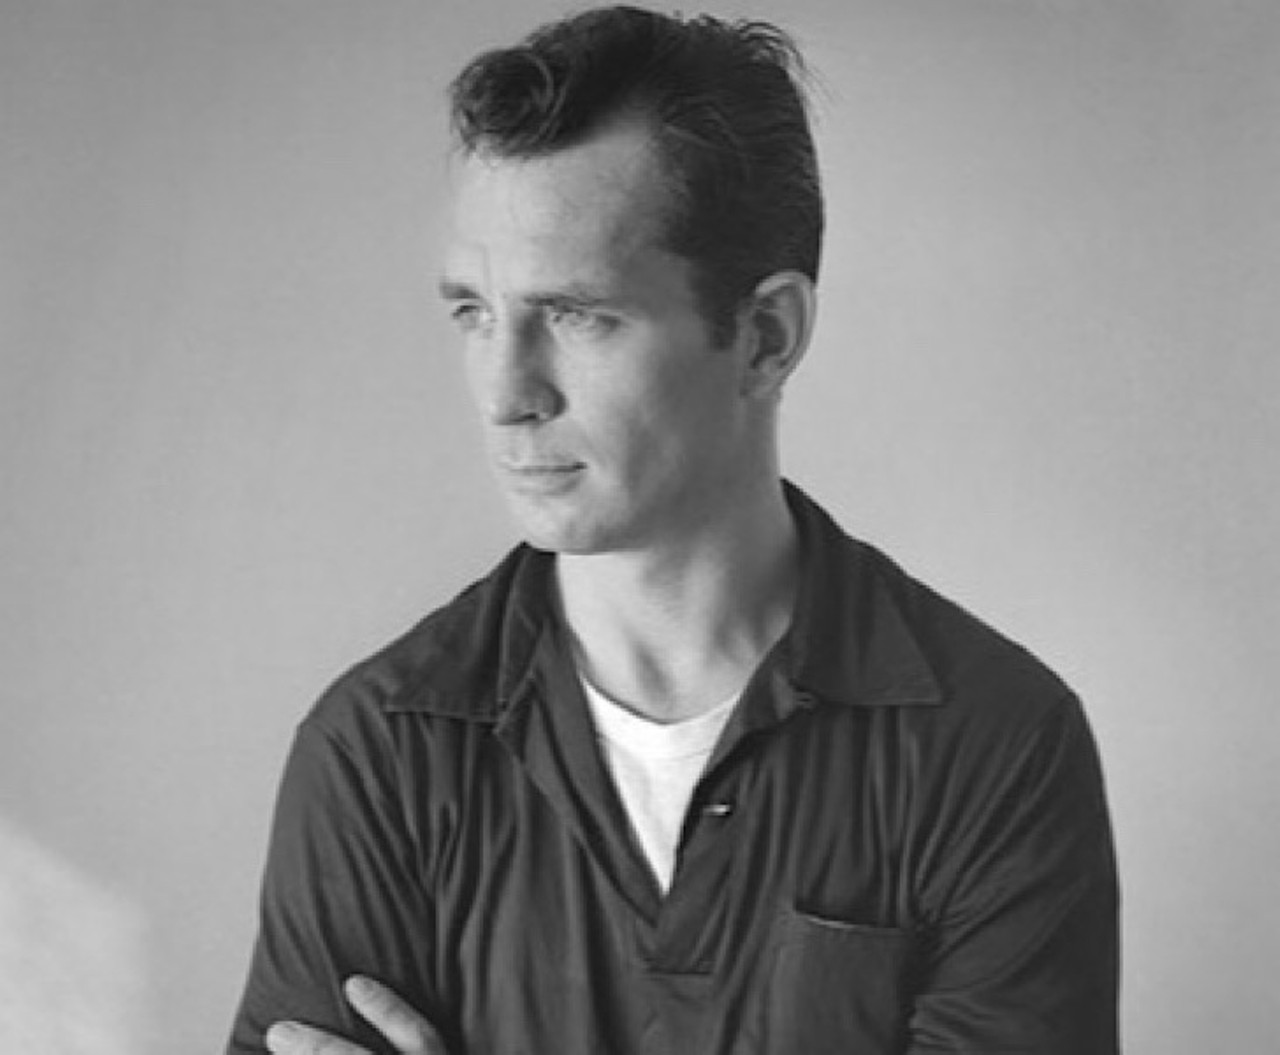 Jack Kerouac
Considered a pioneer of the &#147;Beat Generation,&#148; Jack Kerouac spent the later part of his life in the St. Pete area, as he passed away at St. Anthony&#146;s Hospital. His work as a writer includes &#147;On the Road,&#148; &#147;The Dharma Bums,&#148; and &#147;Big Sur.&#148; 
Photo Tom Palumbo via Wikimedia Commons